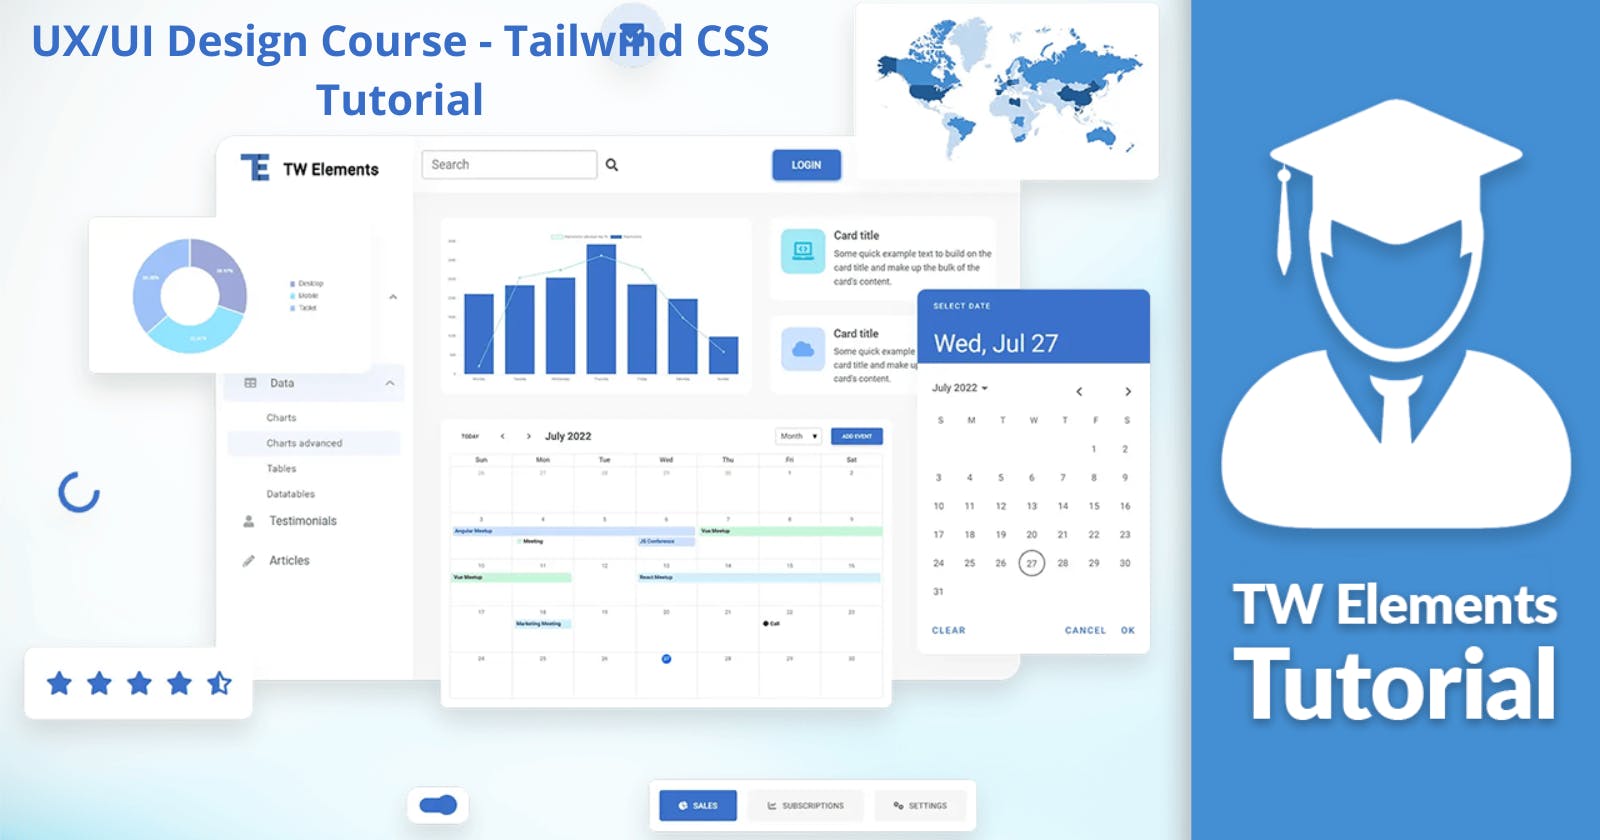 Tailwind CSS UX/UI Design Course - About Tailwind CSS